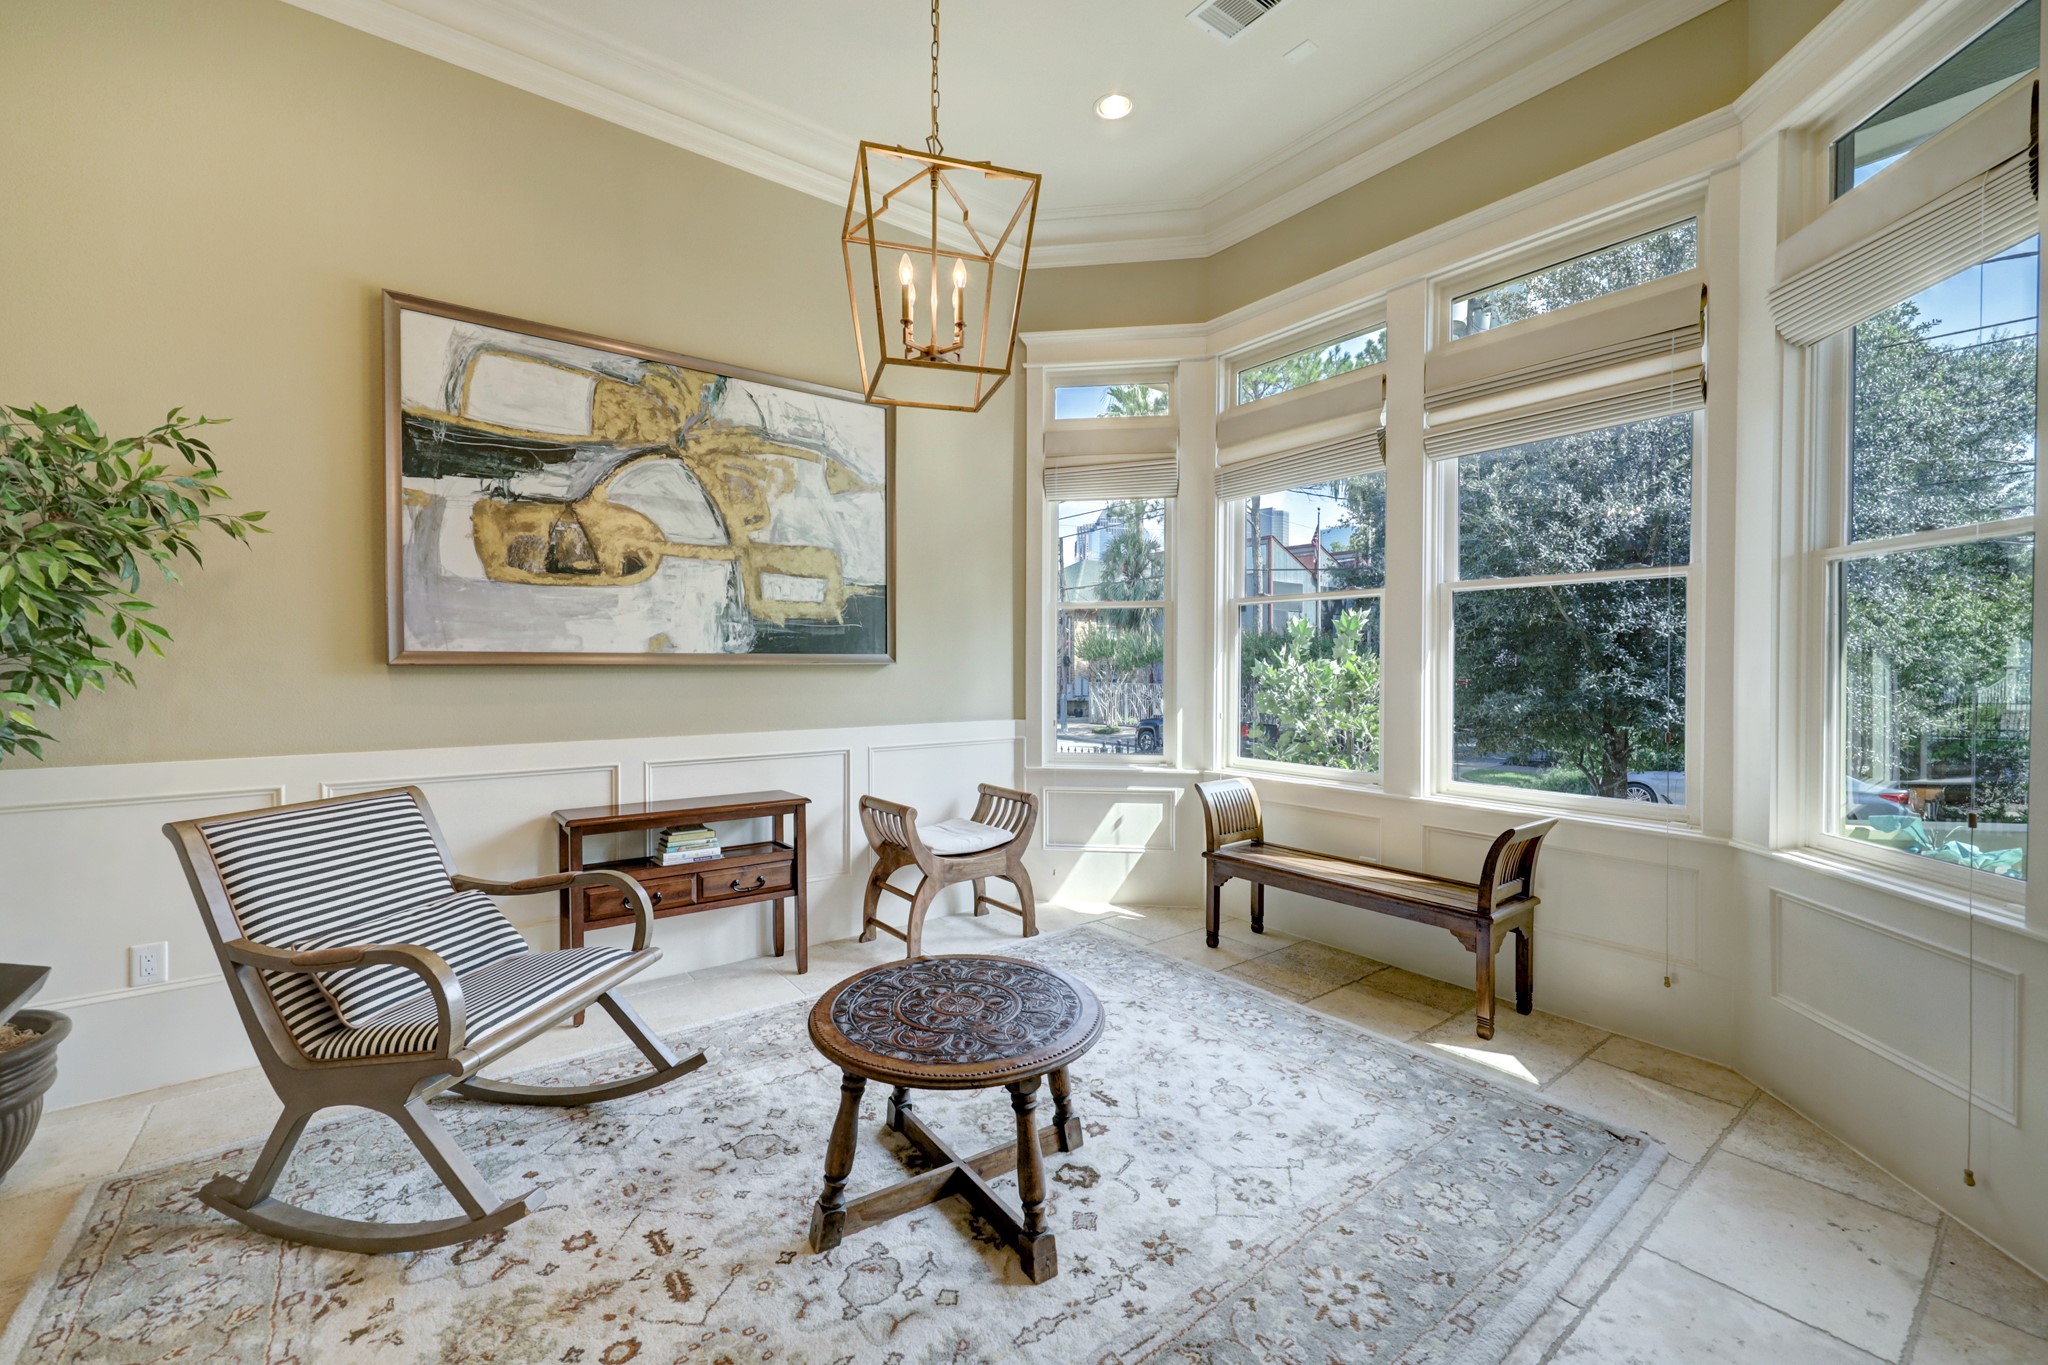 The dining room features Crown molding, chair railing, Victorian custom extra large Jeld-Wen low-e windows, custom window shades and 12' ceilings.